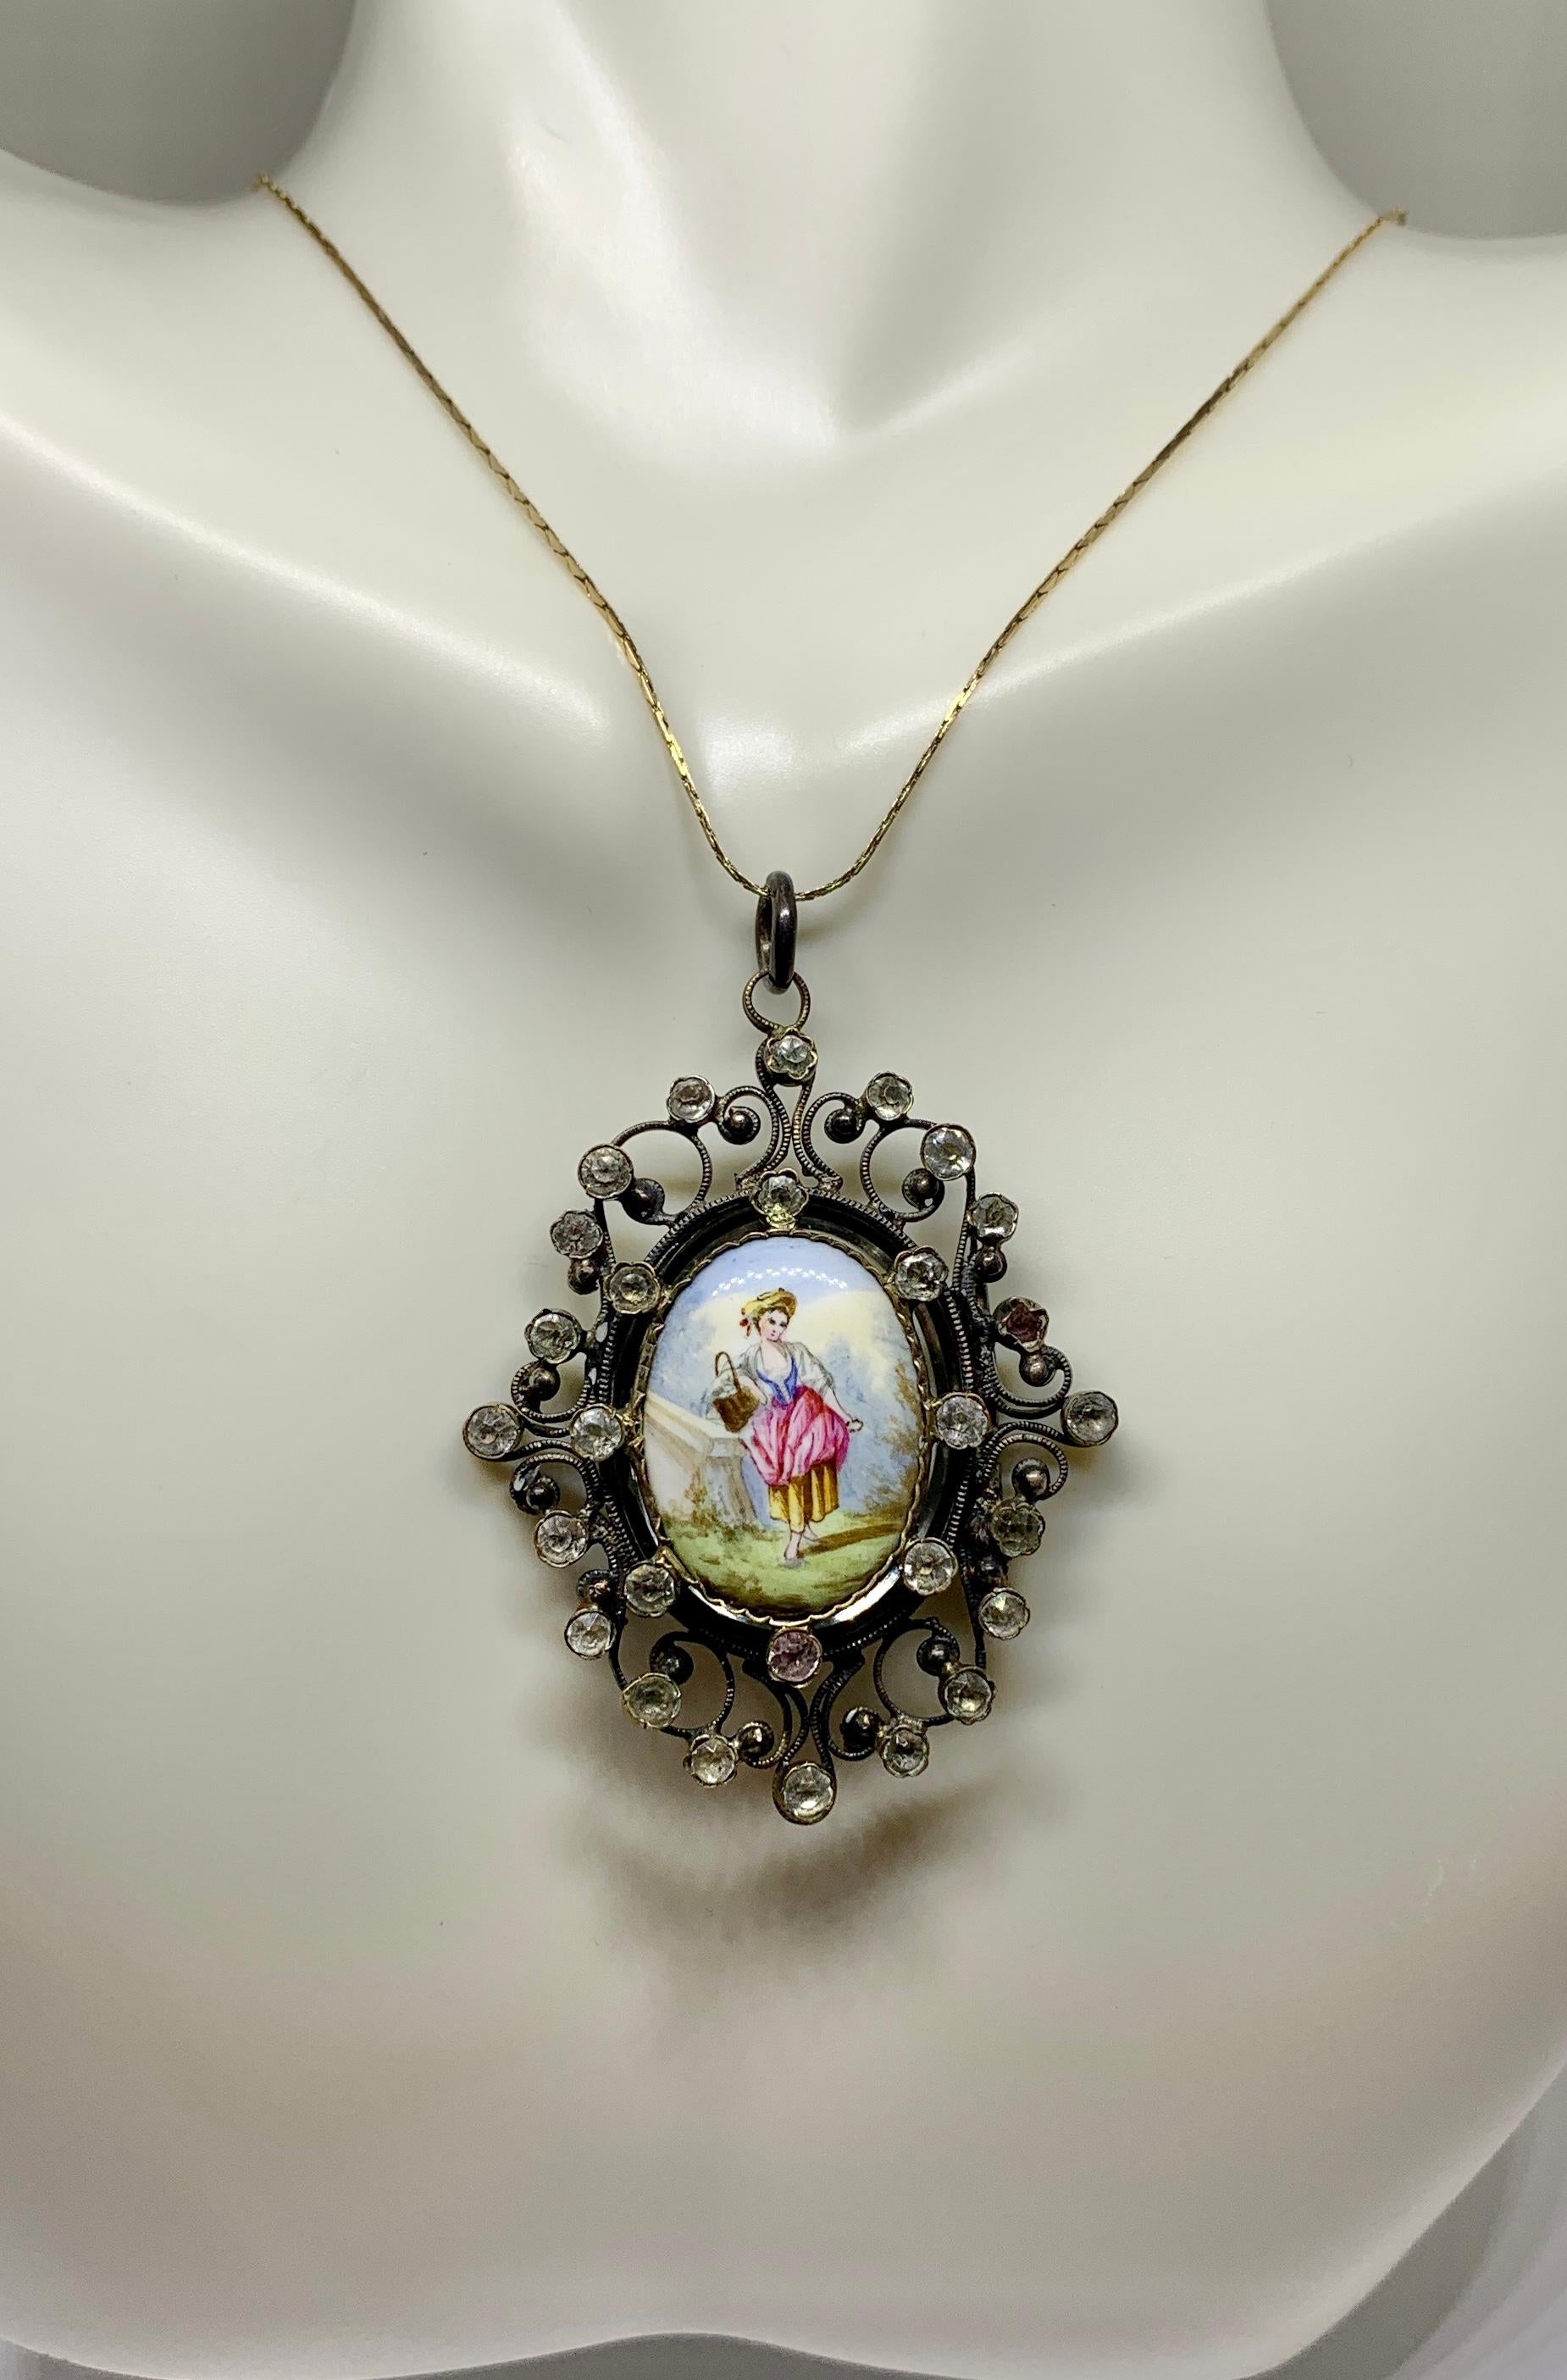 This is a gorgeous Locket Pendant with a hand painted enamel scene of a woman with her basket of eggs in a pastoral scene surrounded by a wonderful filigree silver setting with paste stones.  The early antique jewel dates to the 19th Century.  The